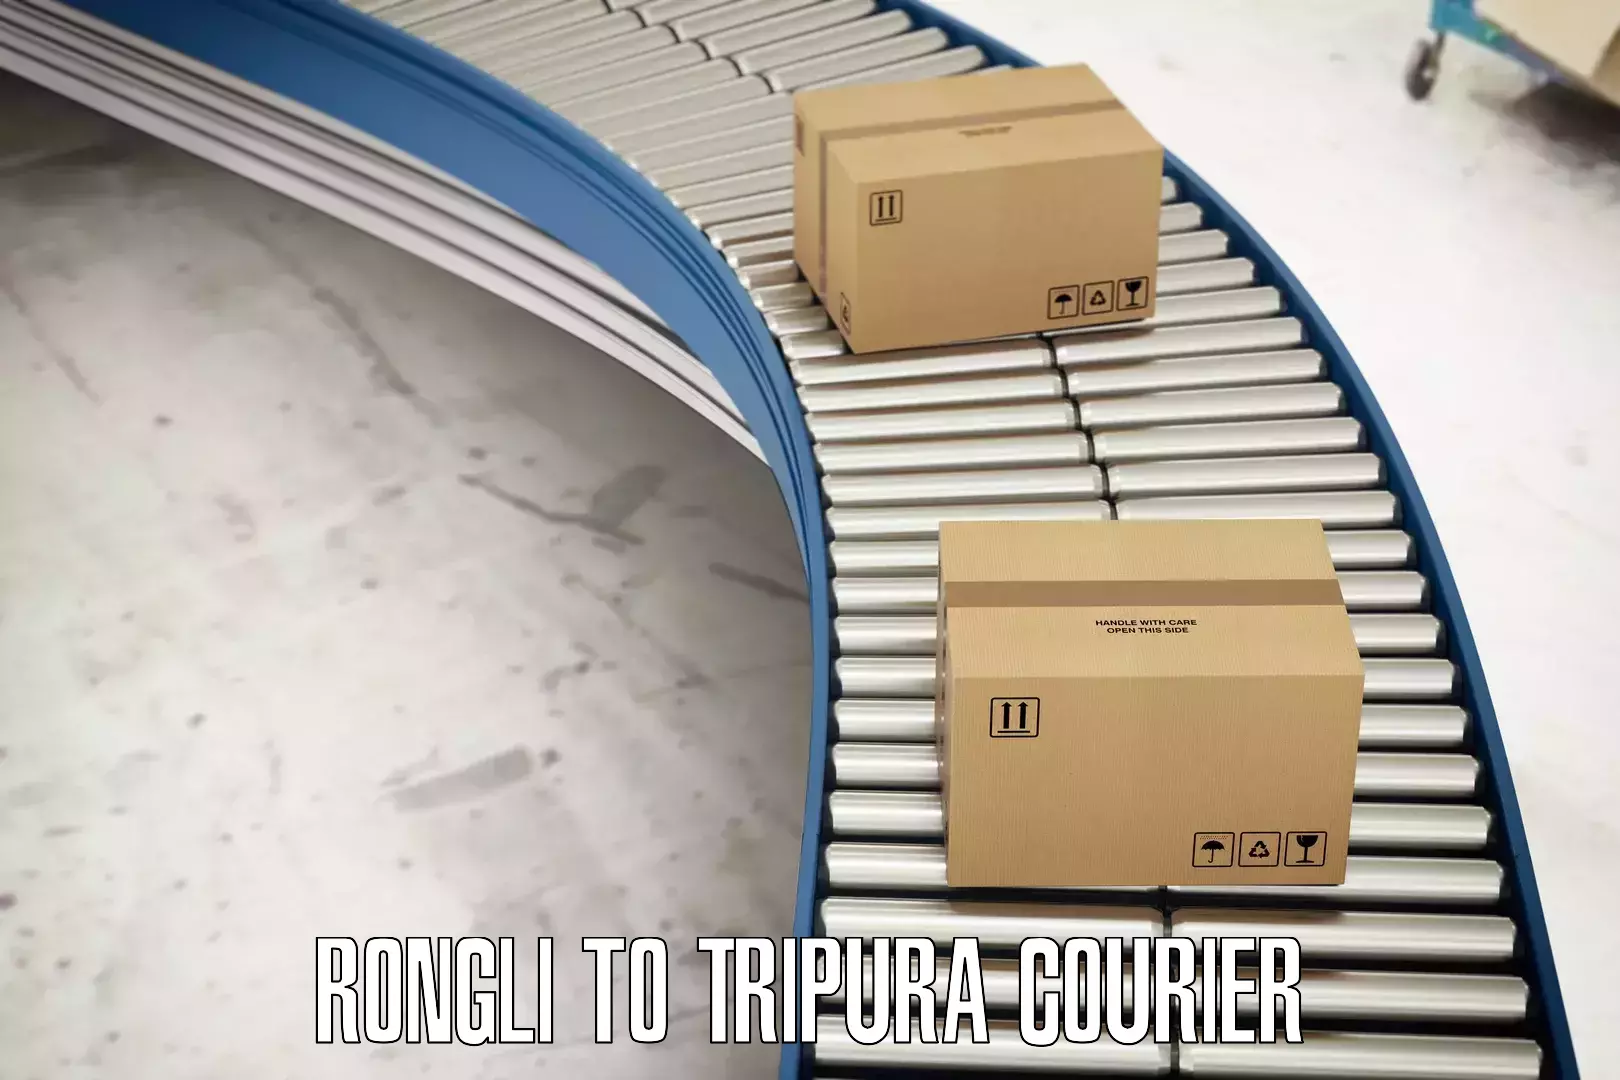 24-hour courier service Rongli to Tripura